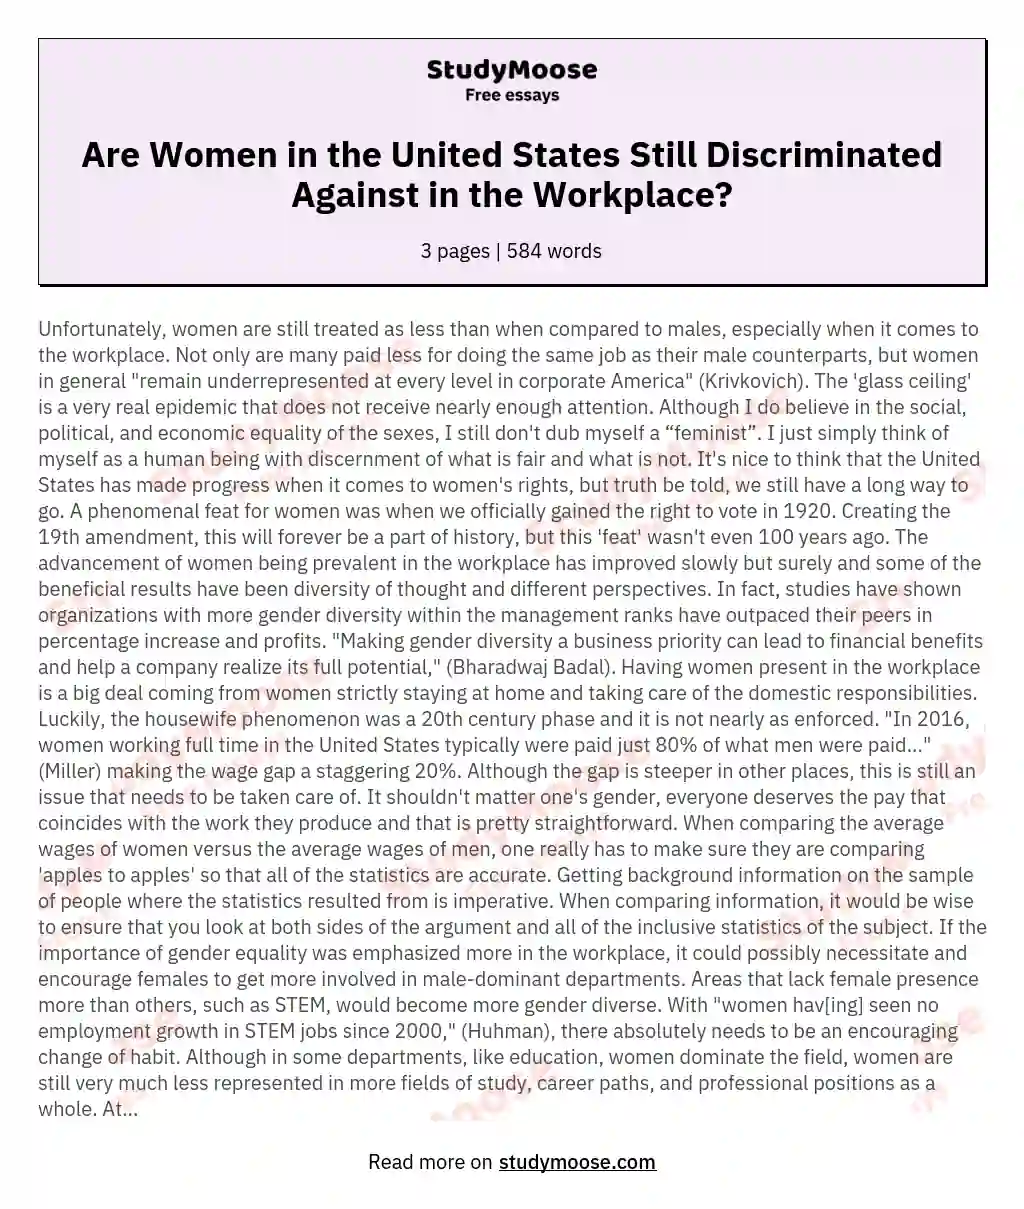 Are Women in the United States Still Discriminated Against in the Workplace? essay